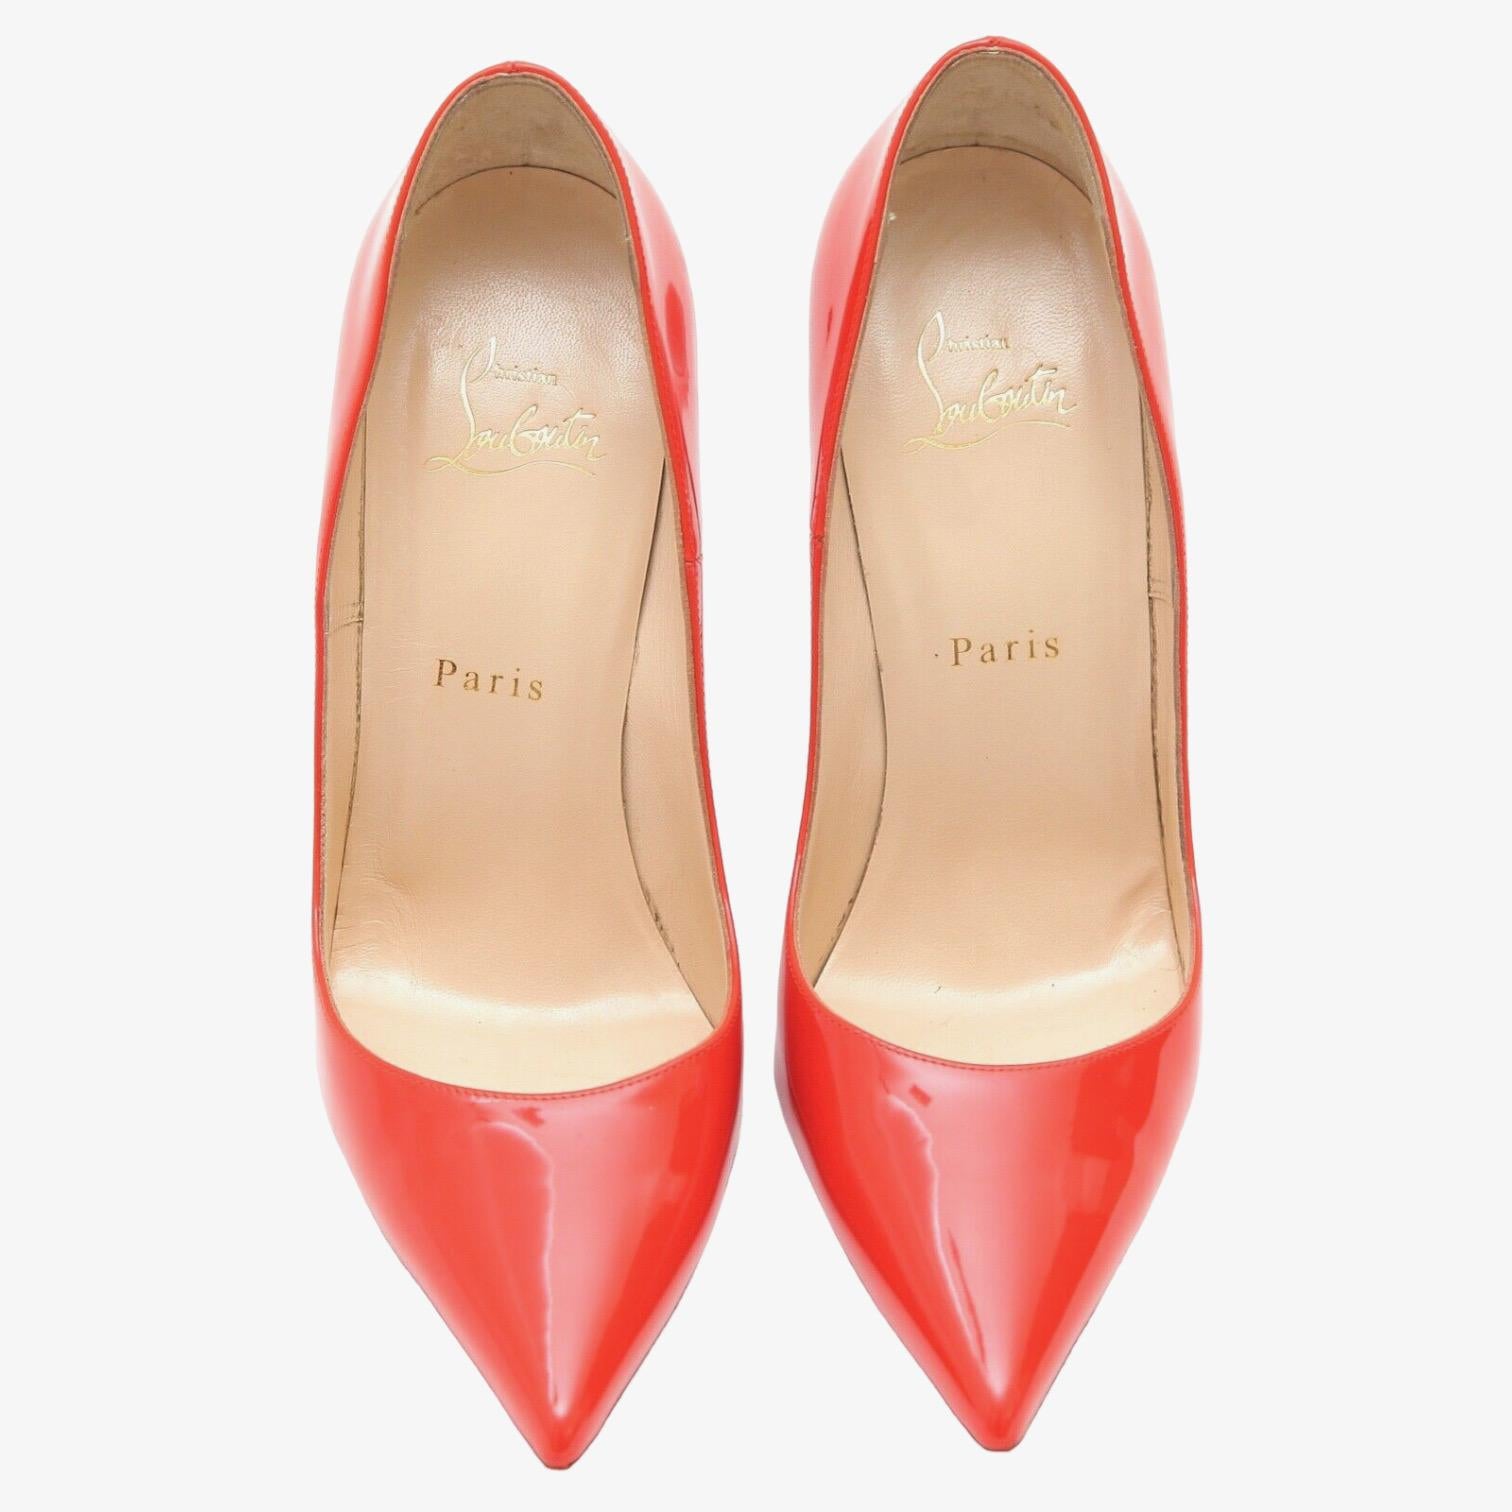 CHRISTIAN LOUBOUTIN Patent Leather Pump ORANGE SO KATE 120 Pointed Toe 38 In Good Condition For Sale In Hollywood, FL